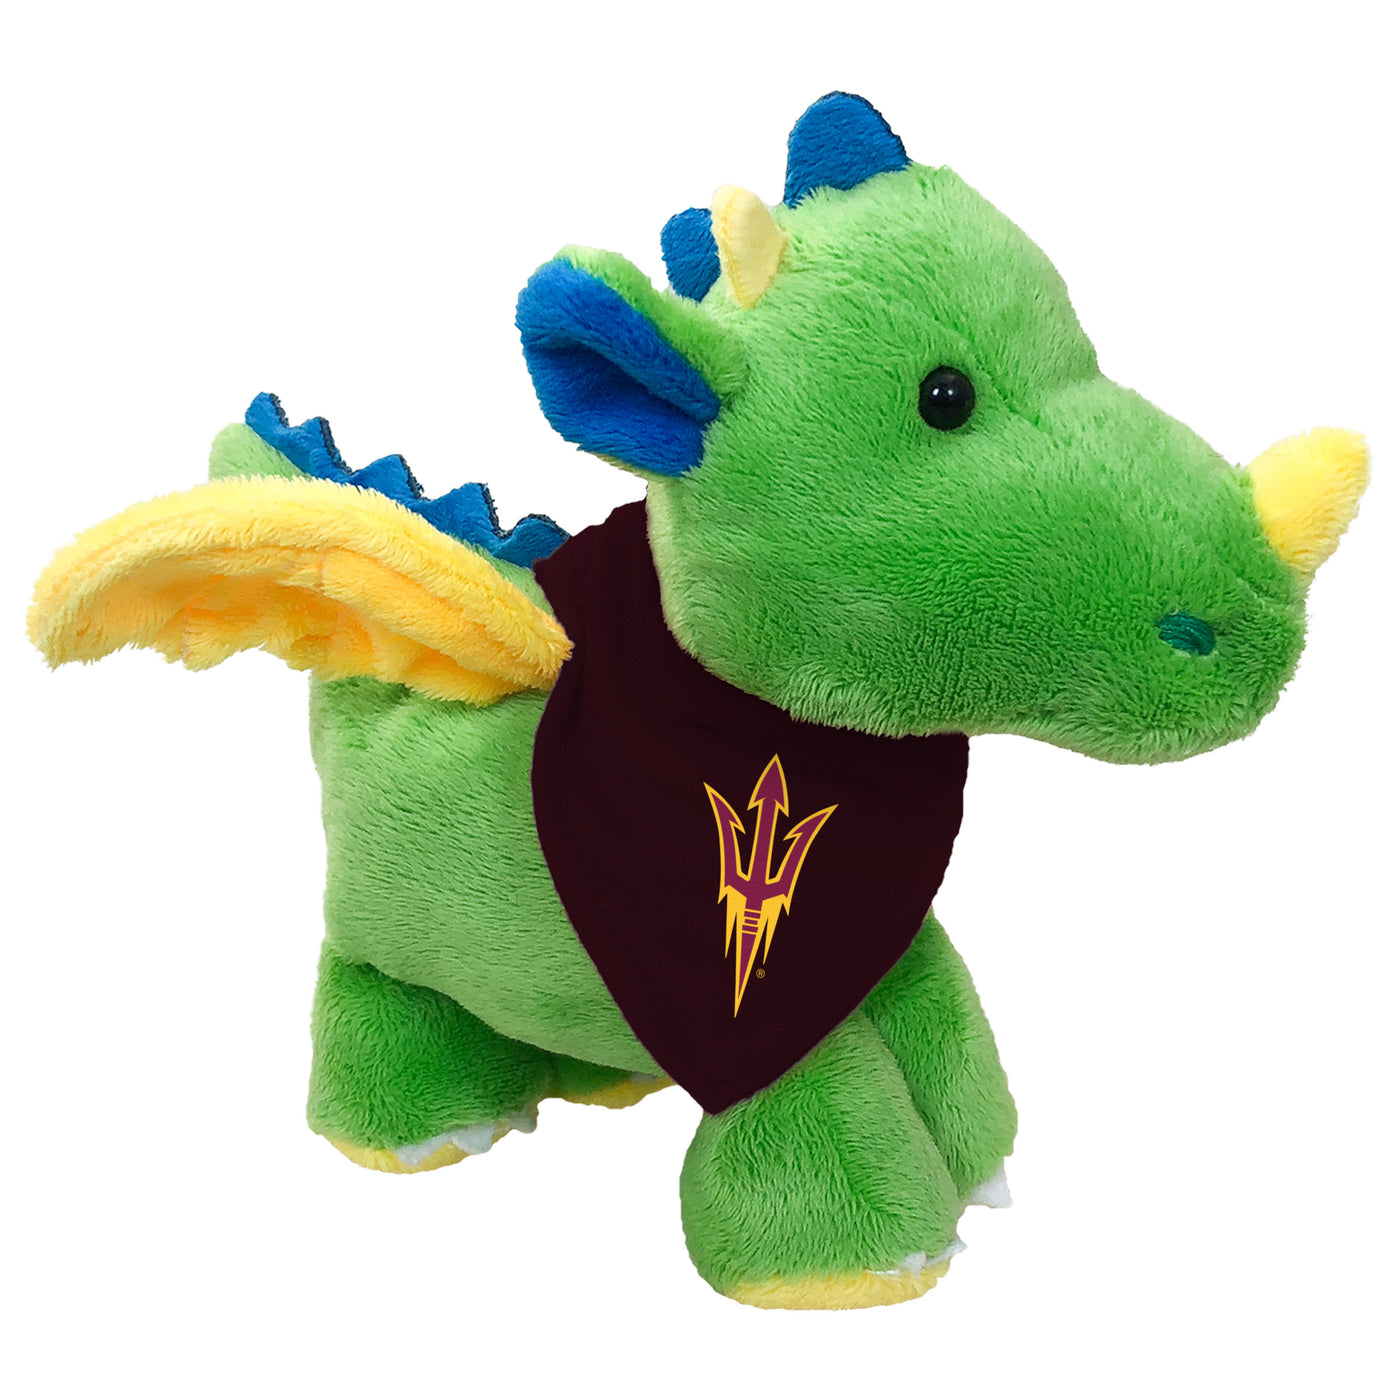 ASU Stuffed Dragon with green body, blue scales,  yellow wings and horn. Dragon is wearing a maroon bandana around its neck that has the pitchfork logo on it. 